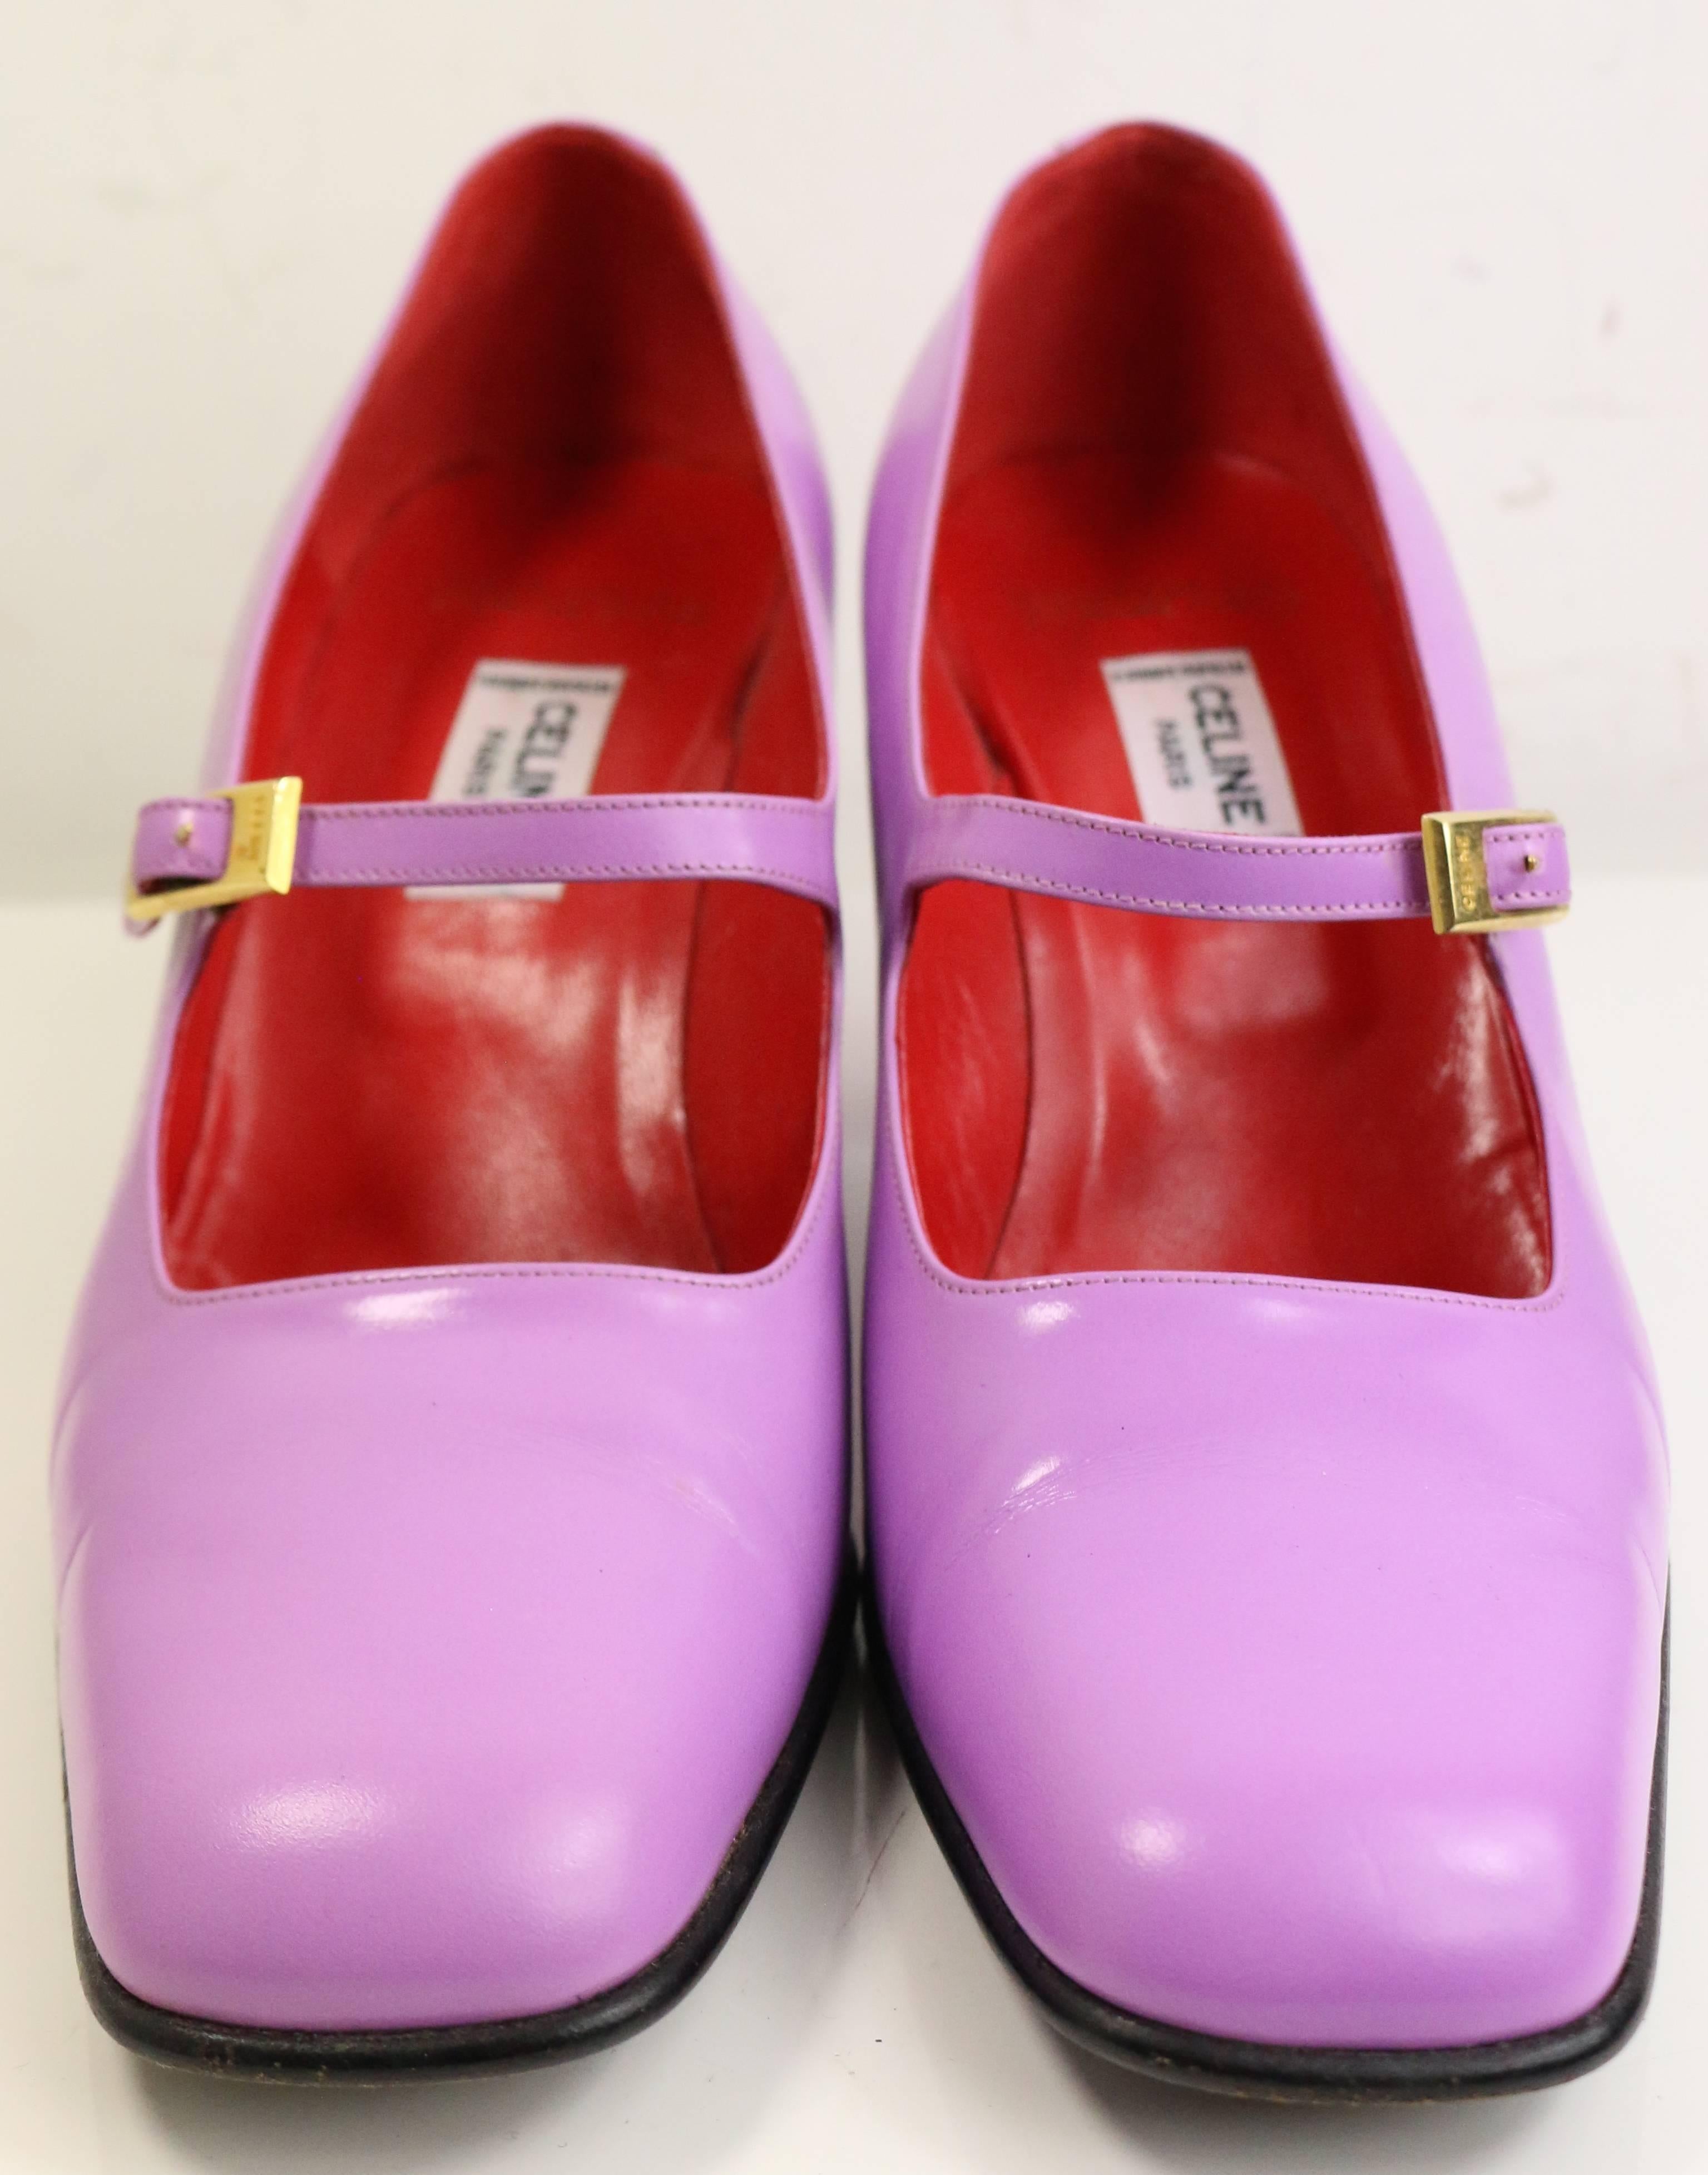 - Vintage 90s Celine purple leather mary jane shoes. The colourful combination with red interior is very original and vintage like. One of a kind! 

- Featuring gold toned 